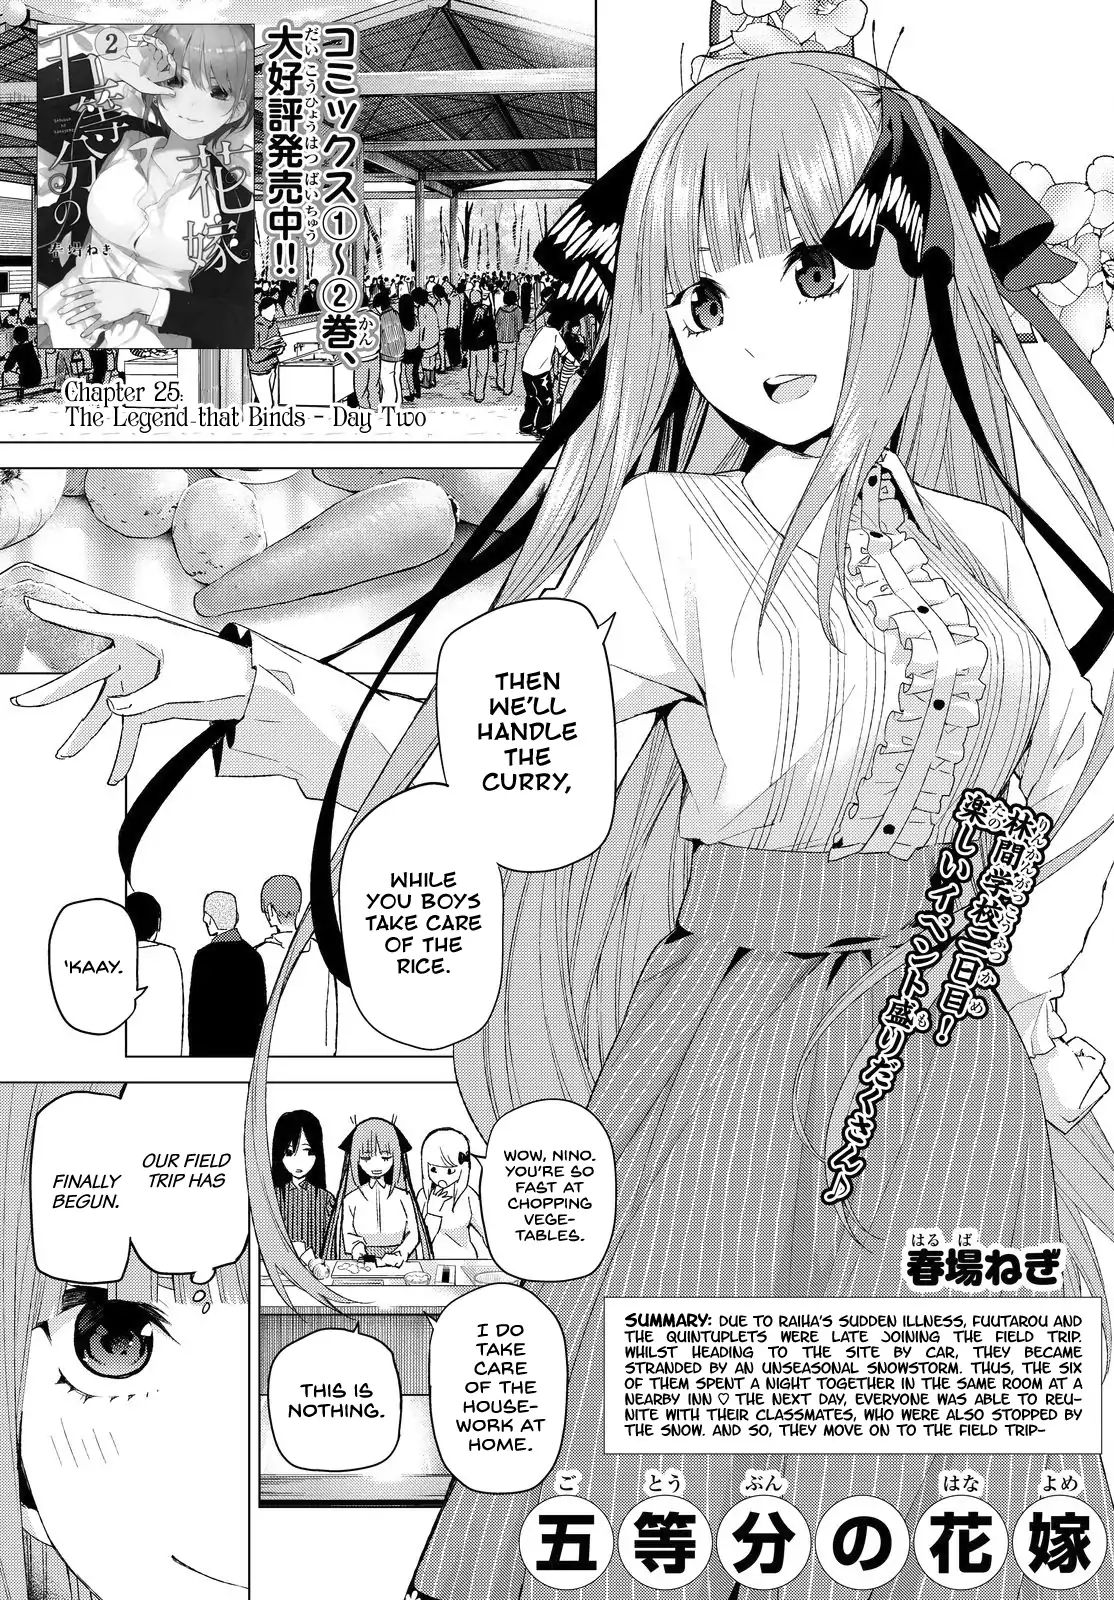 Go-Toubun No Hanayome Vol.4 Chapter 25: The Legend That Binds - Day Two (1) - Picture 1